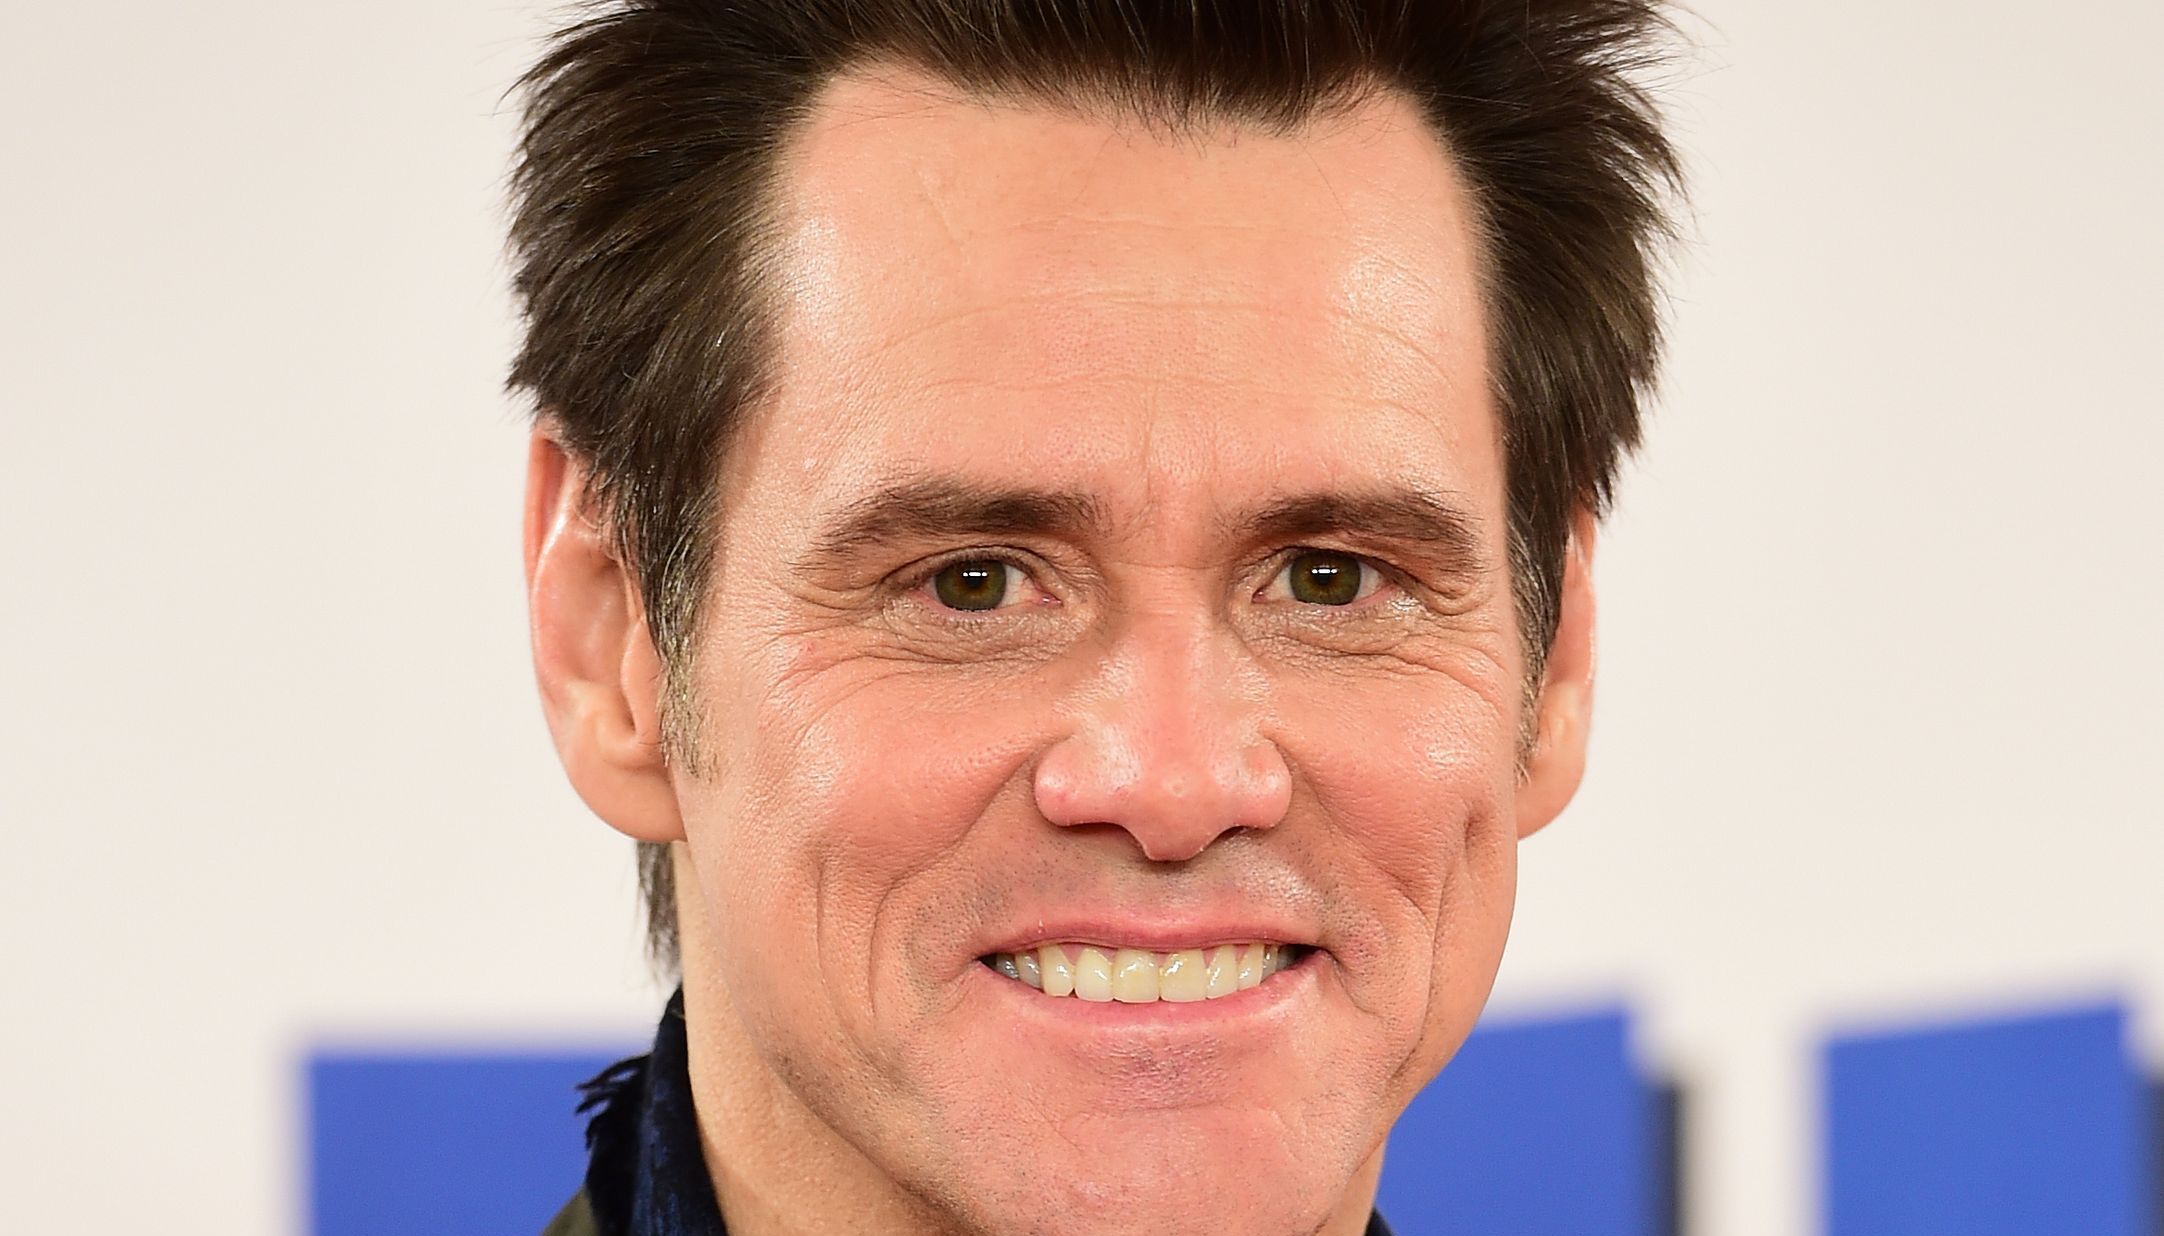 Jim Carrey attending a photocall for his new film, Dumb And Dumber To, at the Connaught Hotel in London.